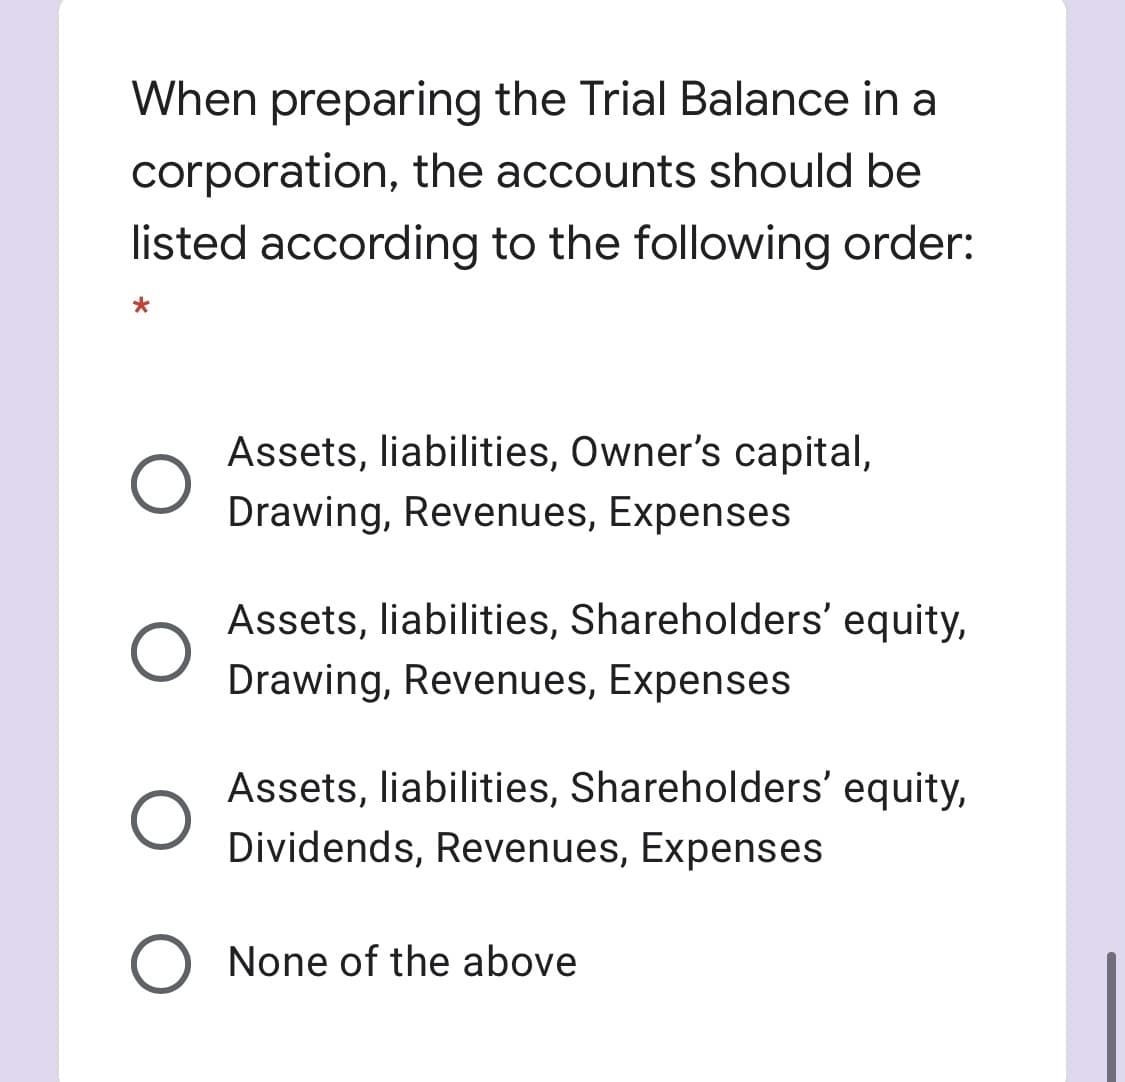 When preparing the Trial Balance in a
corporation, the accounts should be
listed according to the following order:
Assets, liabilities, Owner's capital,
Drawing, Revenues, Expenses
Assets, liabilities, Shareholders' equity,
Drawing, Revenues, Expenses
Assets, liabilities, Shareholders' equity,
Dividends, Revenues, Expenses
None of the above
